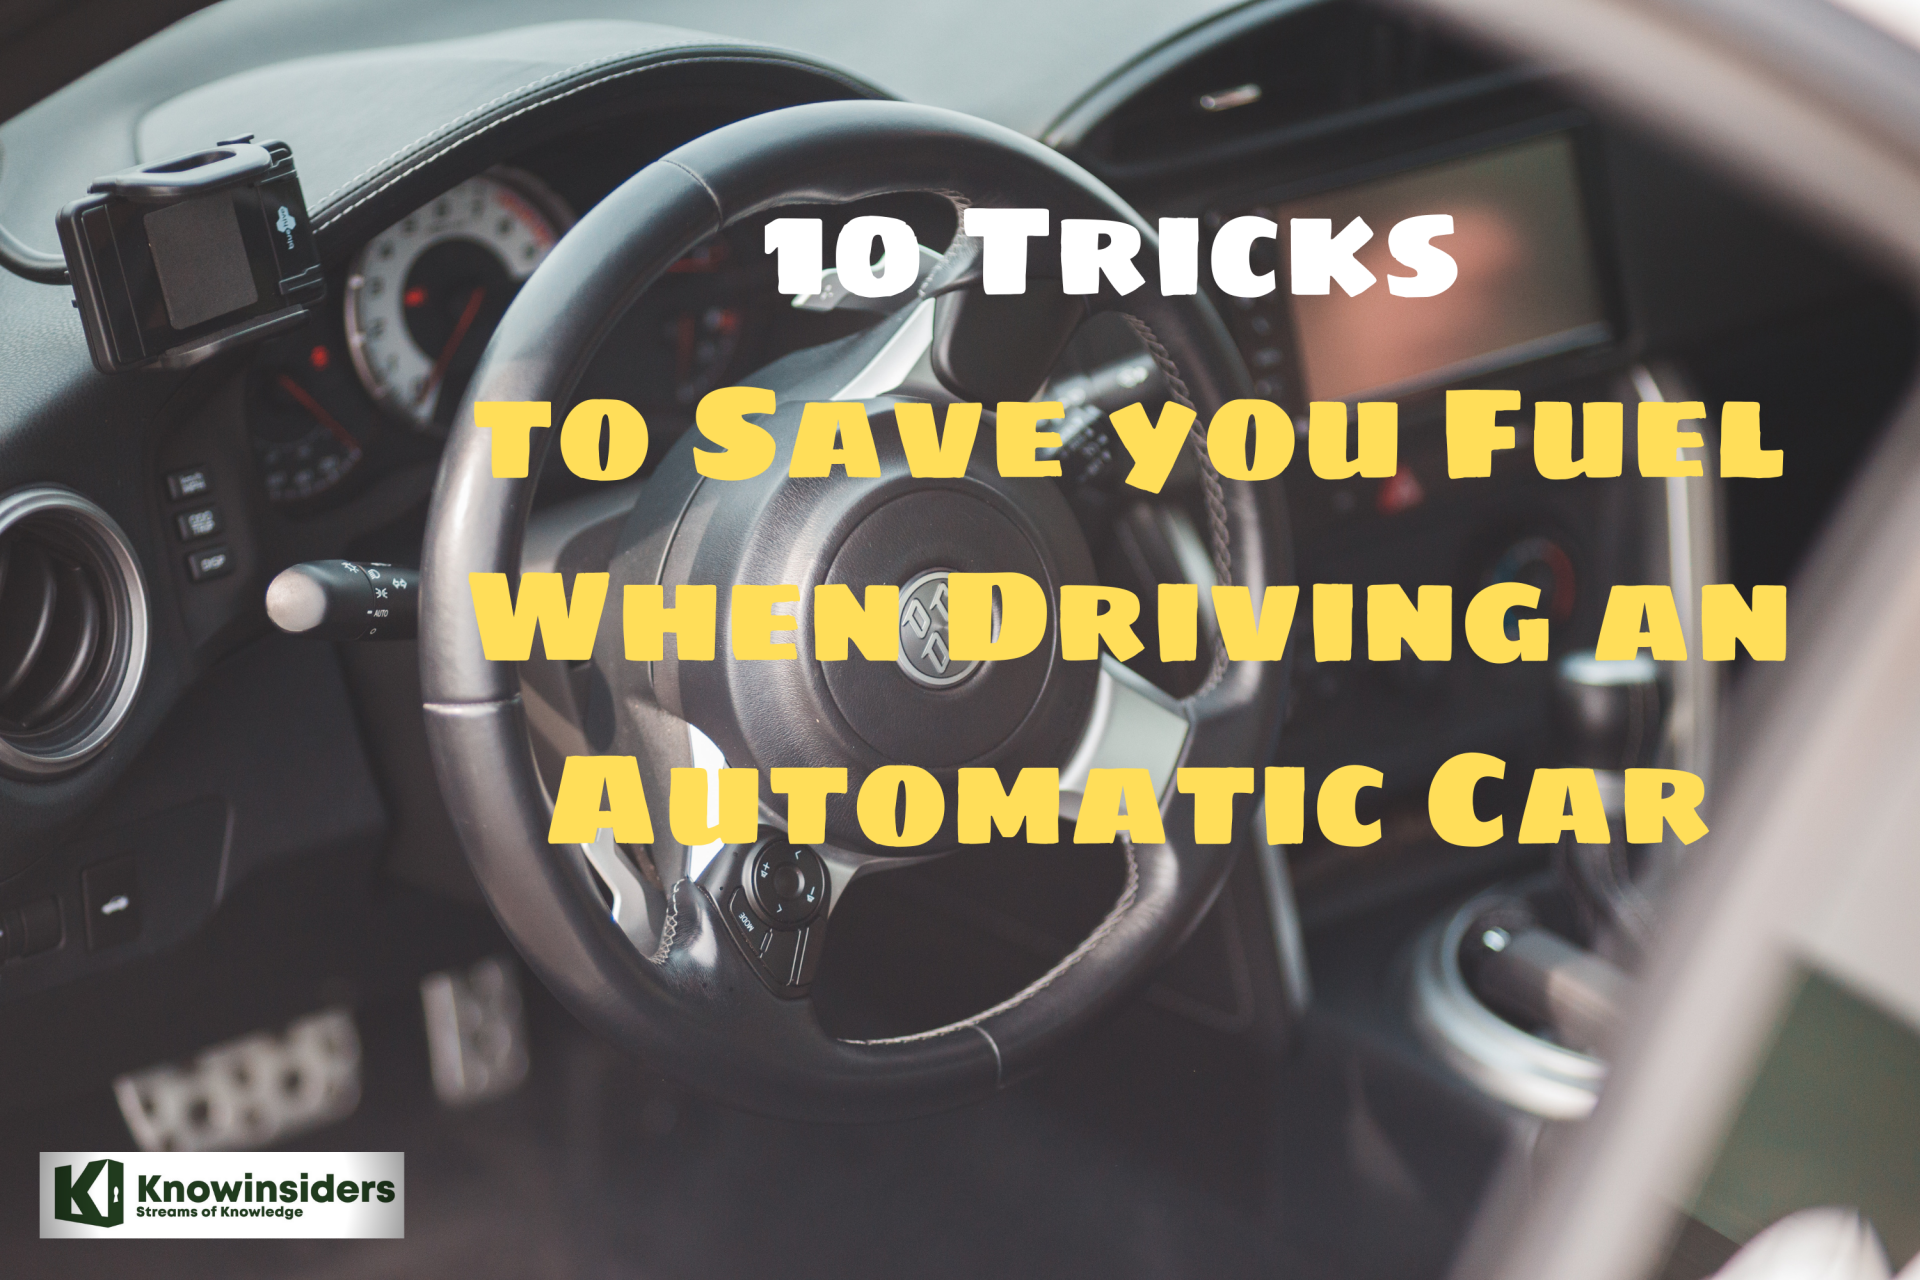 10 Tricks to Save you Fuel When Driving an Automatic Car